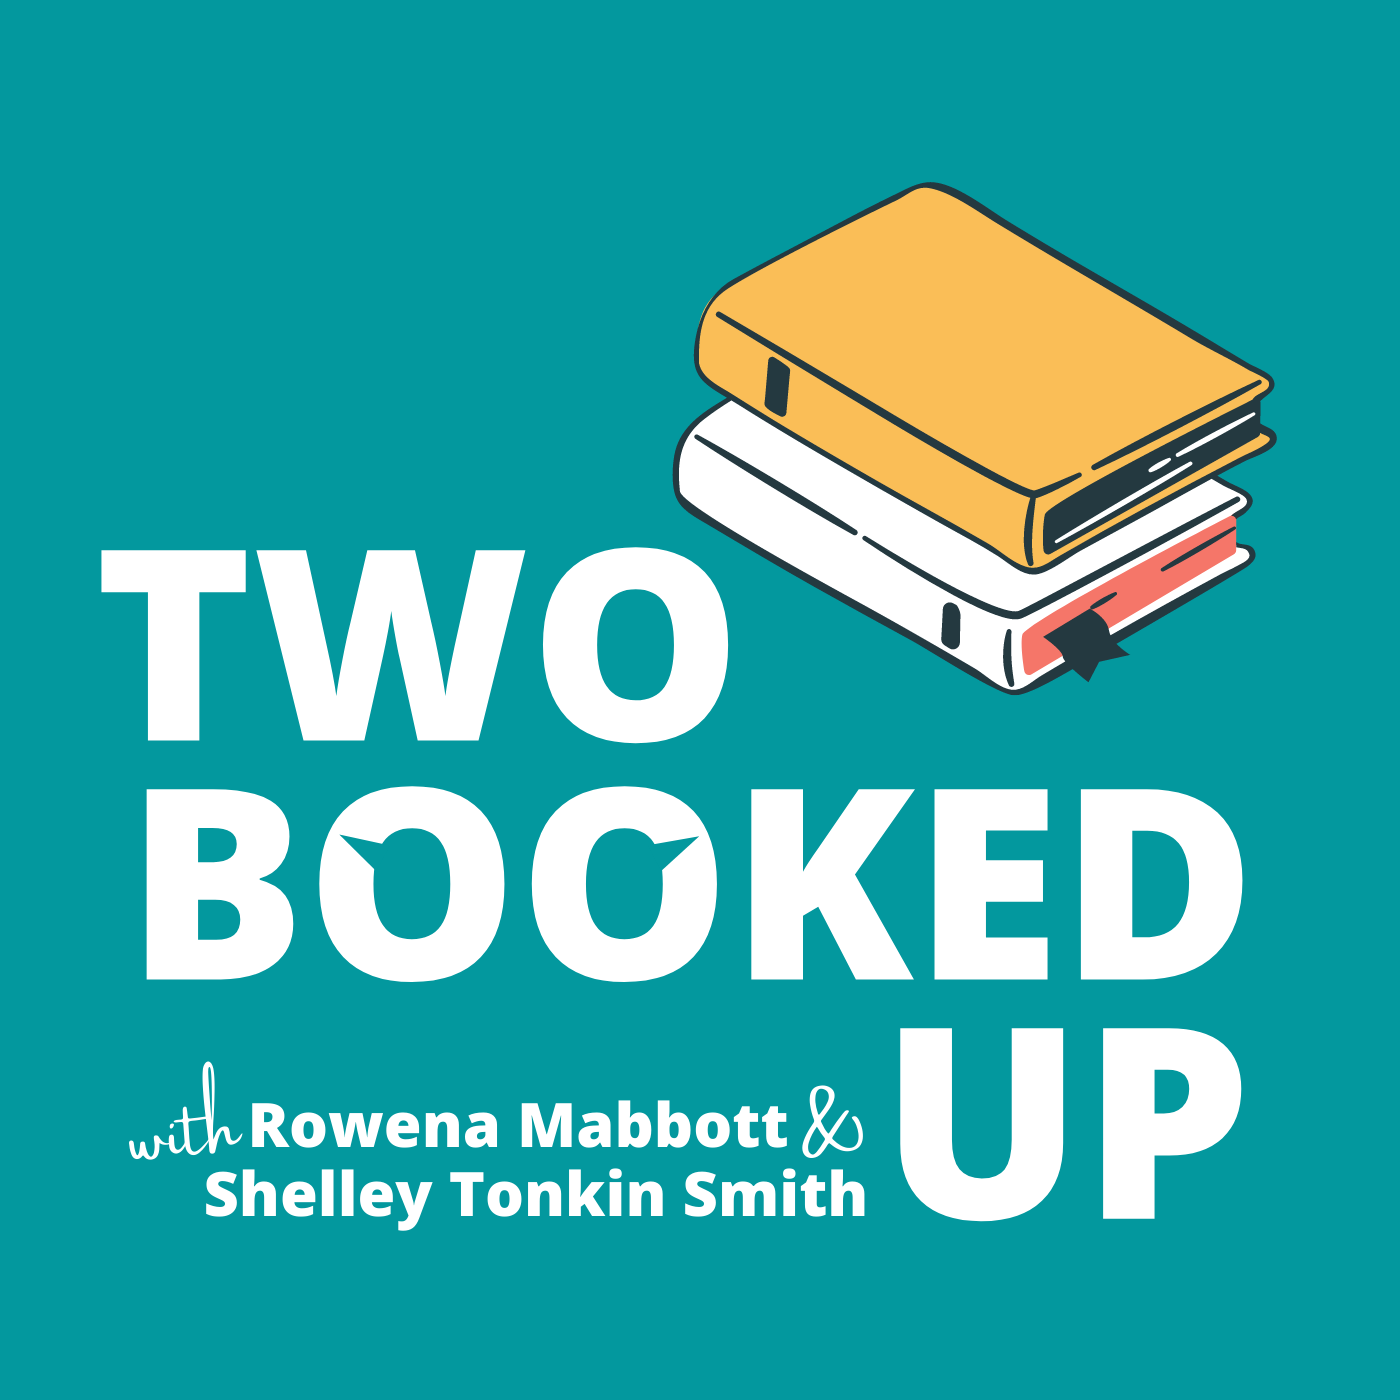 Introducing... Two Booked Up